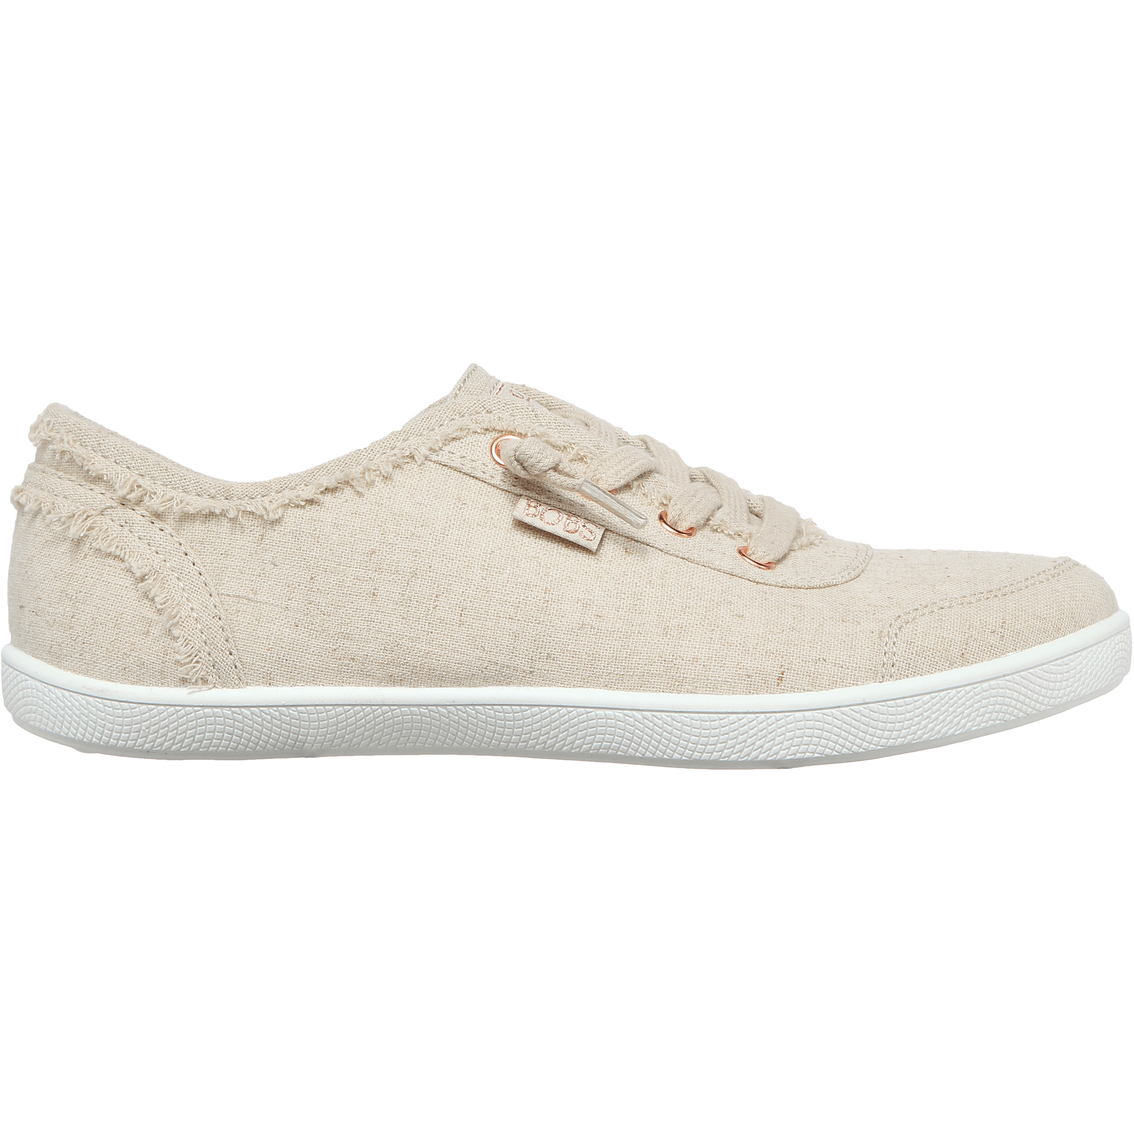 Bobs From Skechers Women's Bobs B Cute Natural Wonder Shoes | Sneakers ...